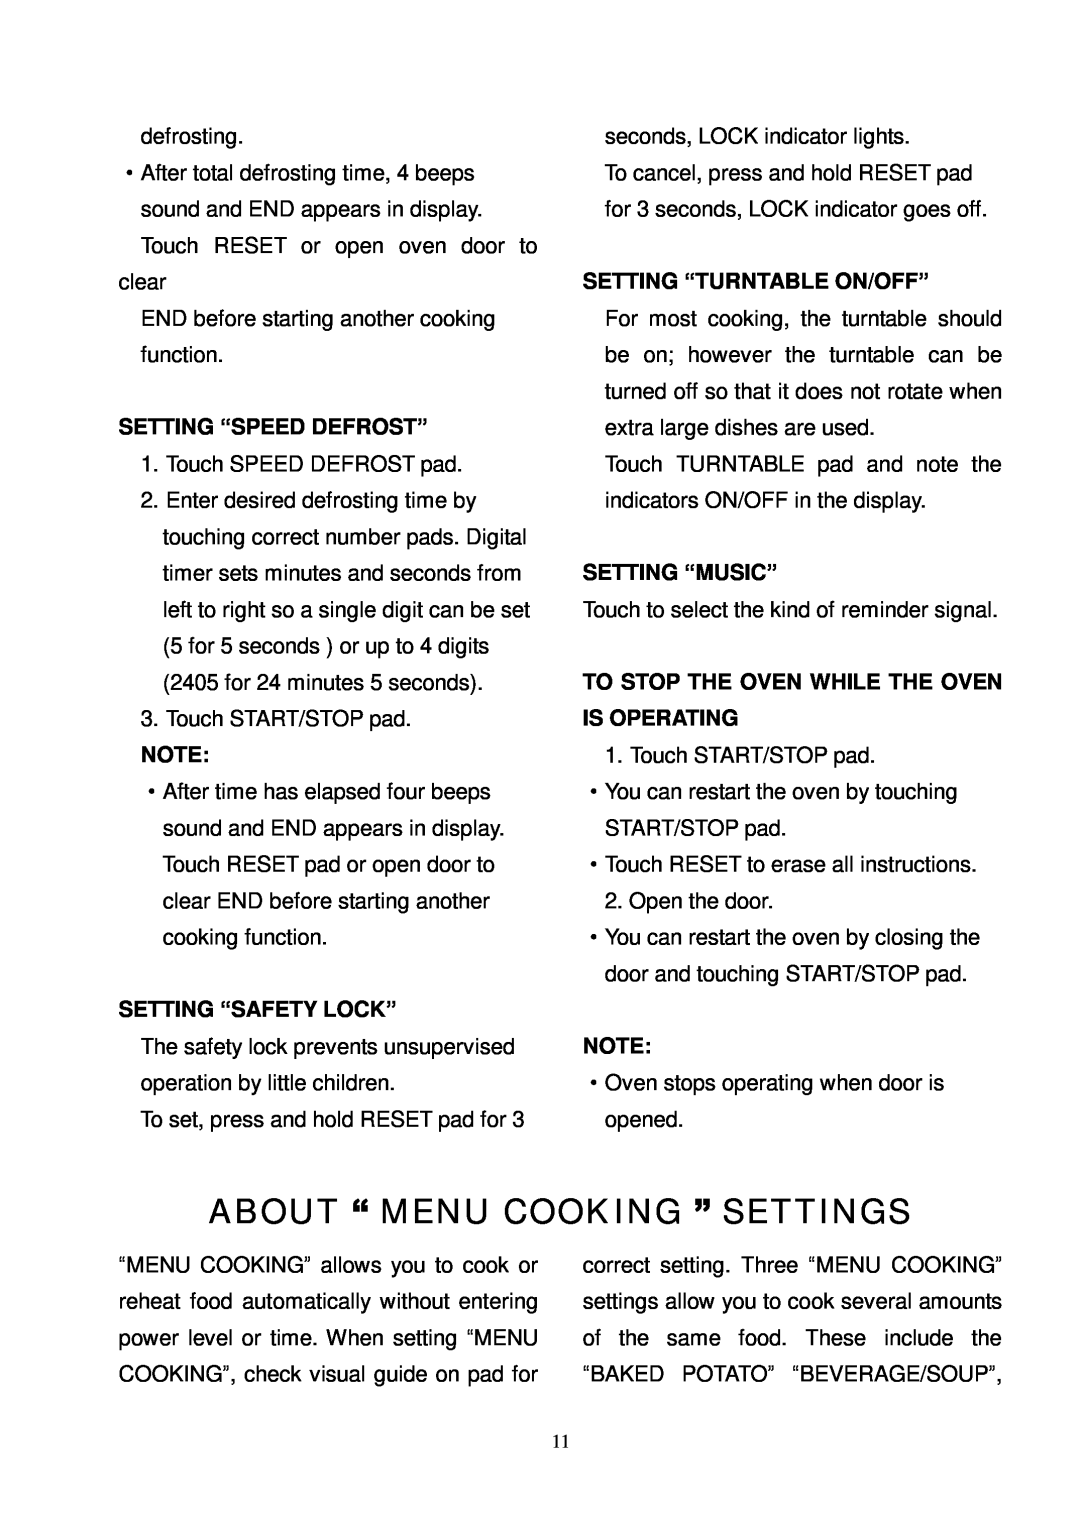 Oster OMW1480 About “ Menu Cooking ” Settings, Setting “Speed Defrost”, Setting “Safety Lock”, Setting “Turntable On/Off” 